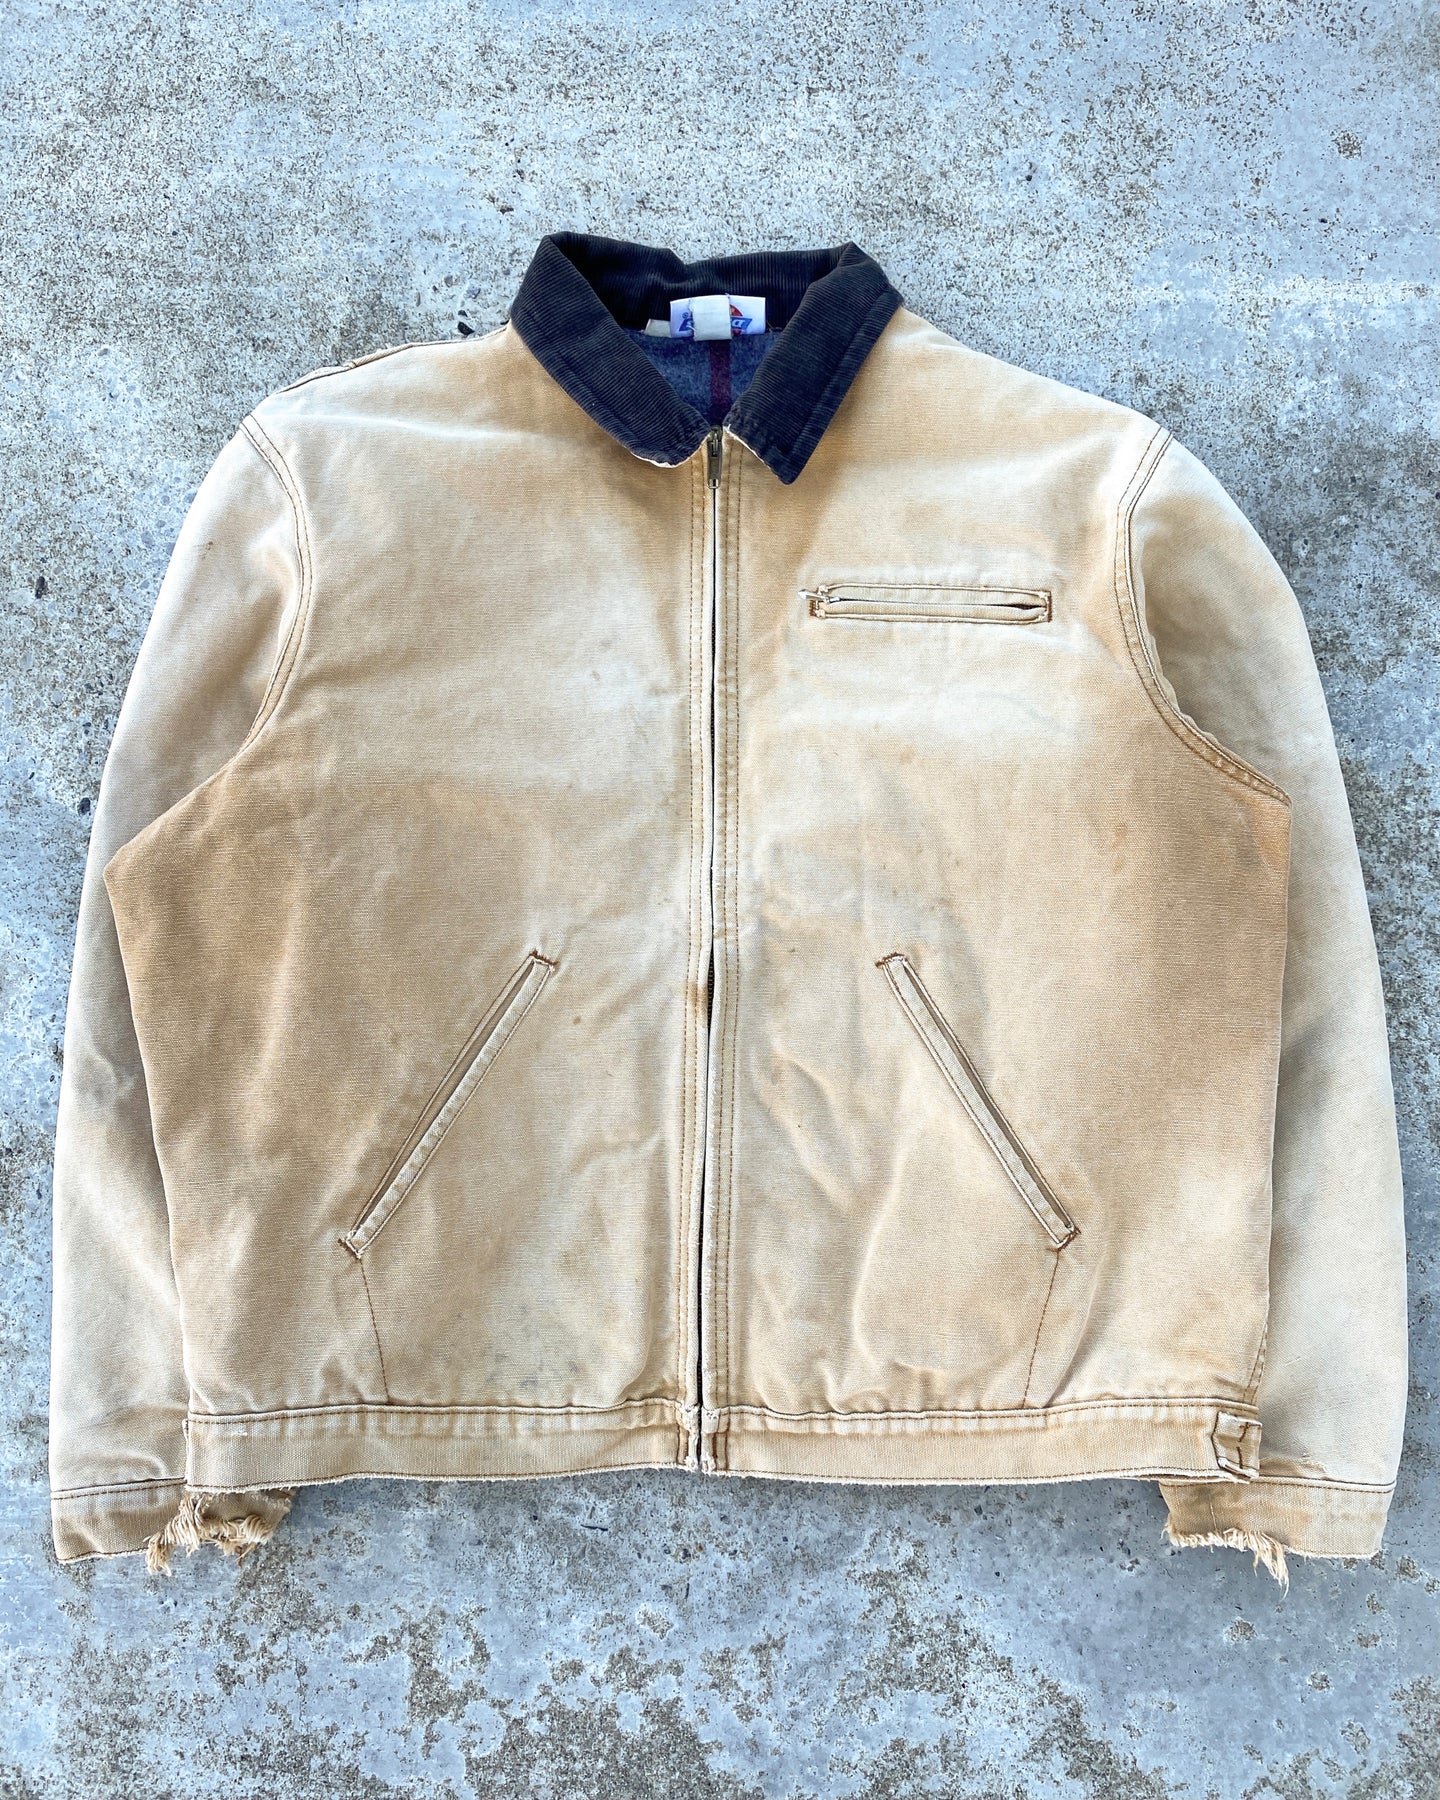 1970s Dickies Faded Detroit Style Work Jacket - Size Large